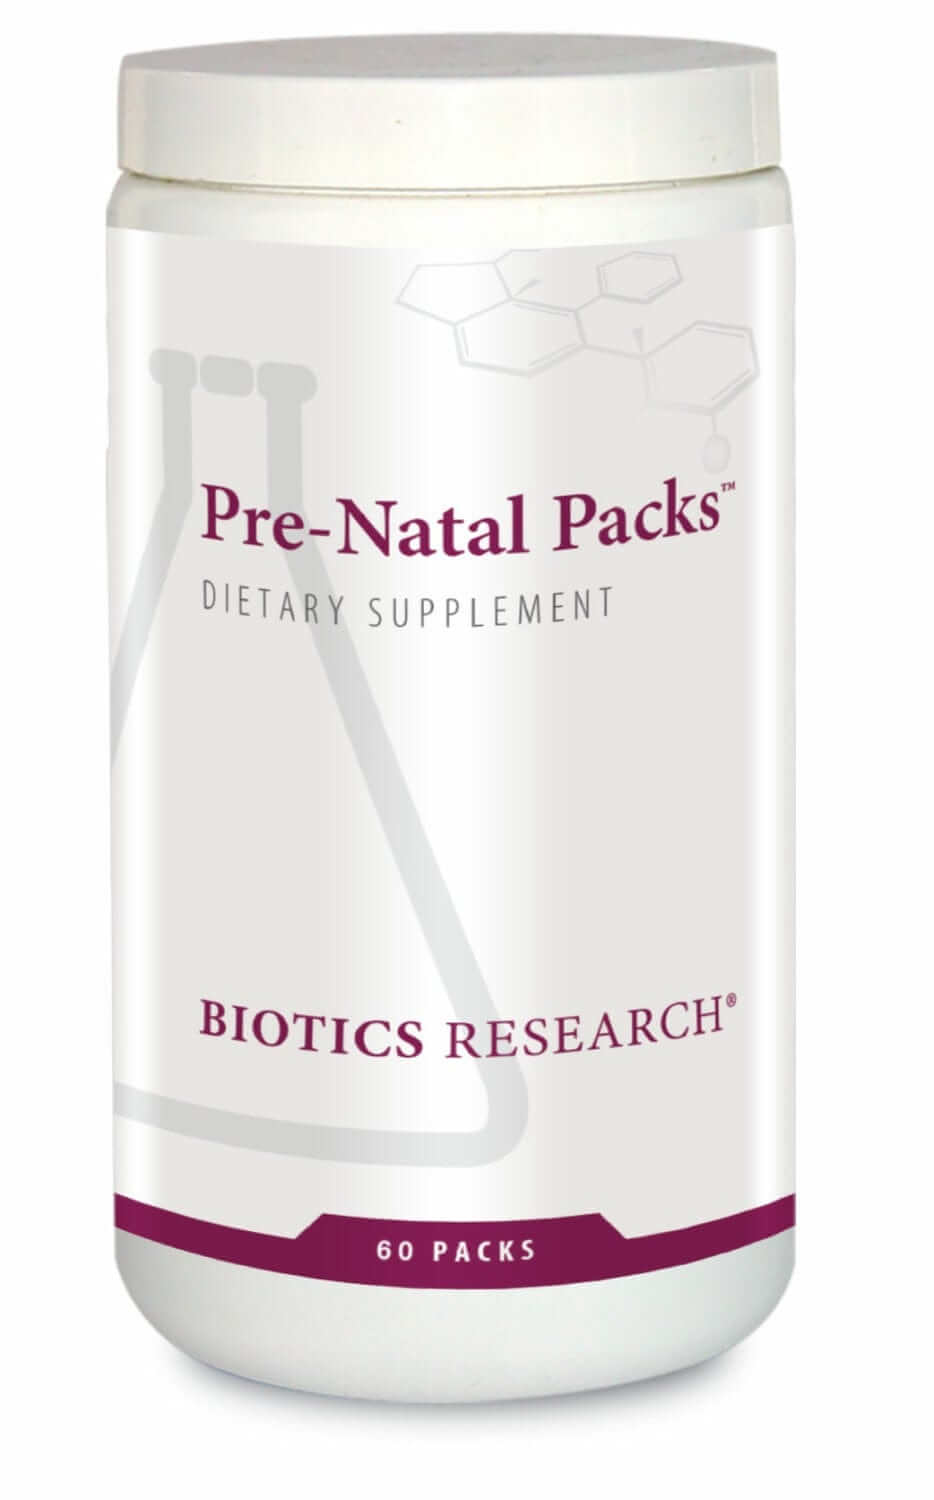 PRE-NATAL PACKS (60 PACKS) Biotics Research Supplement - Conners Clinic